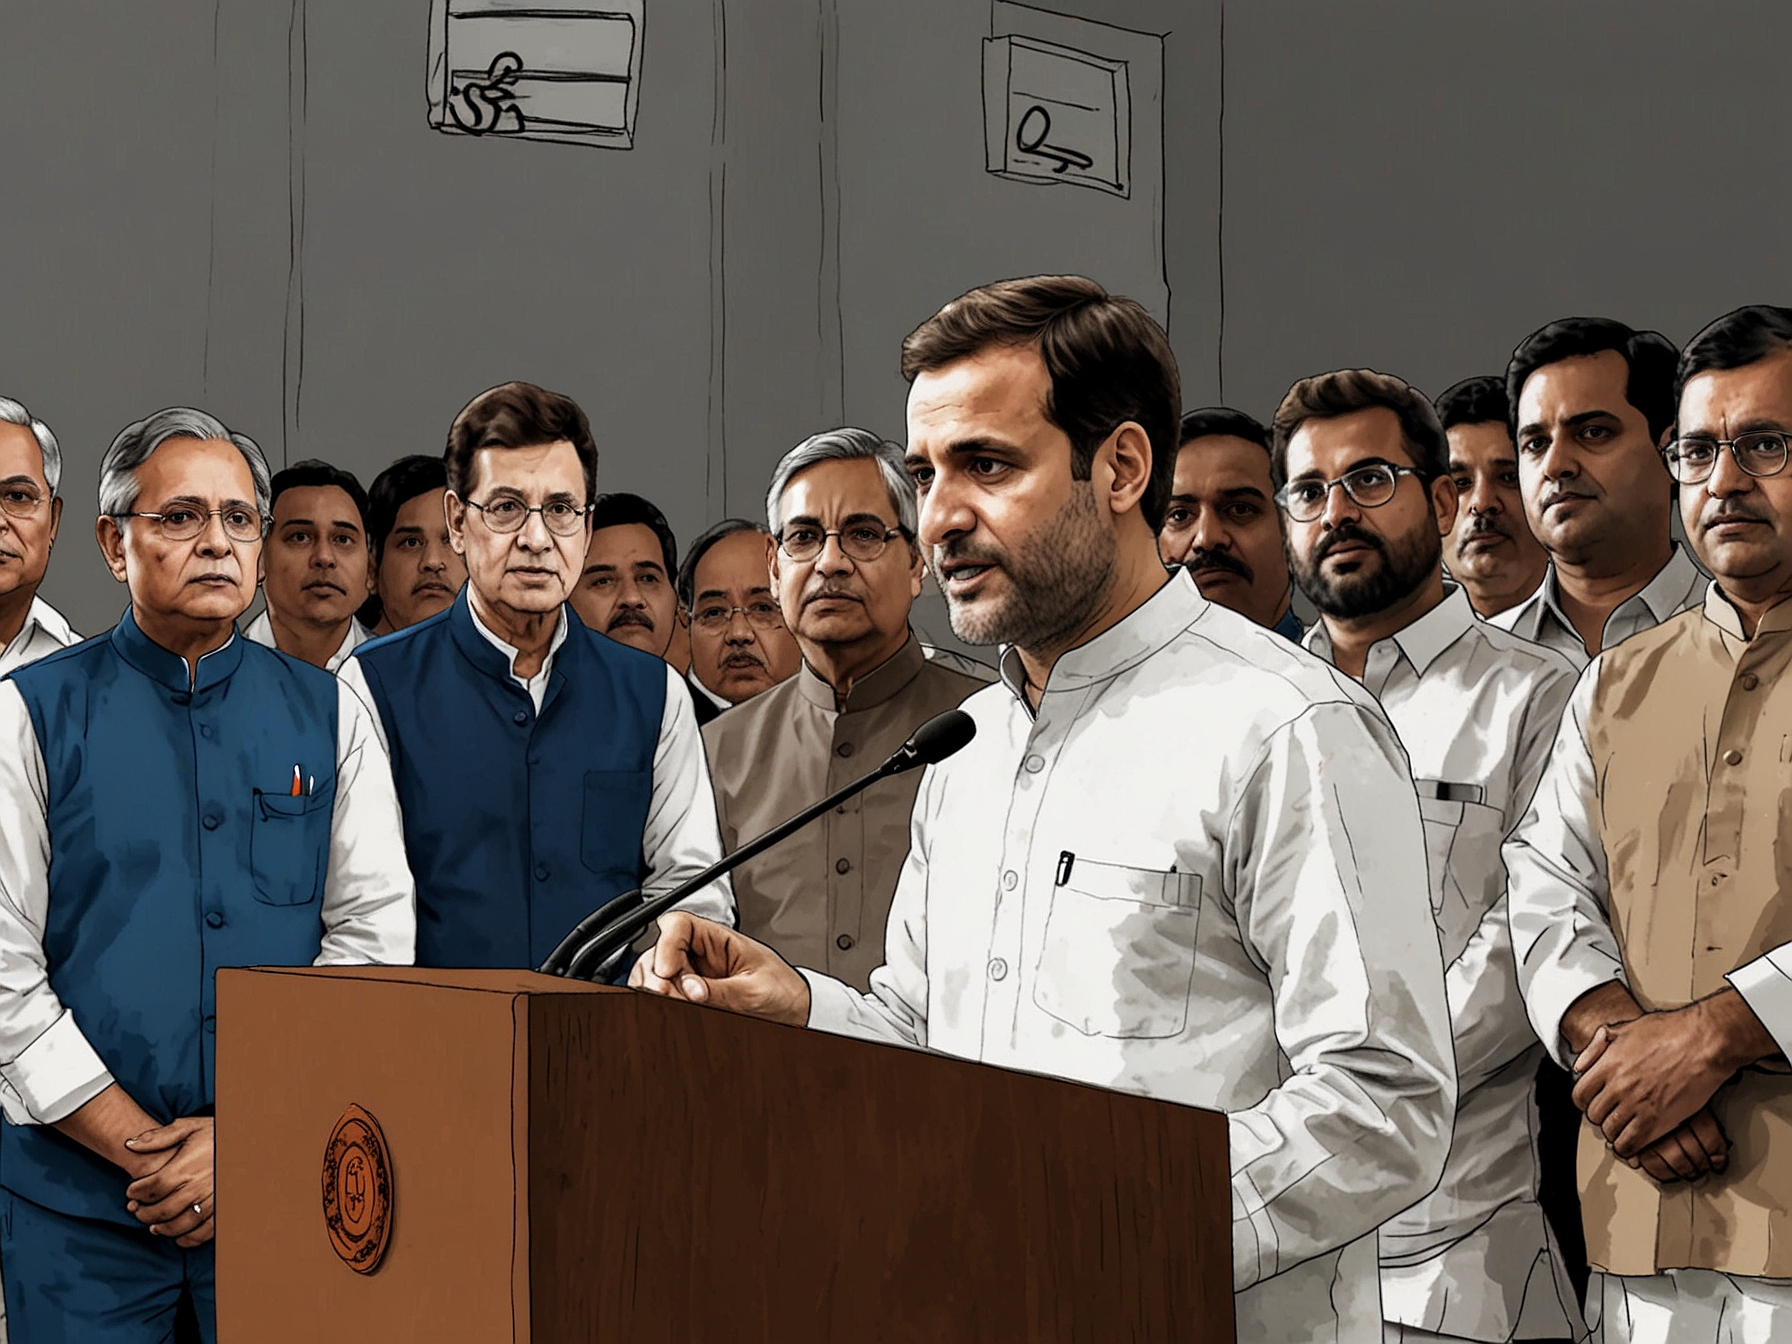 A high-profile political meeting featuring Rahul Gandhi addressing media, emphasizing the need for EVM transparency to safeguard India's electoral integrity.